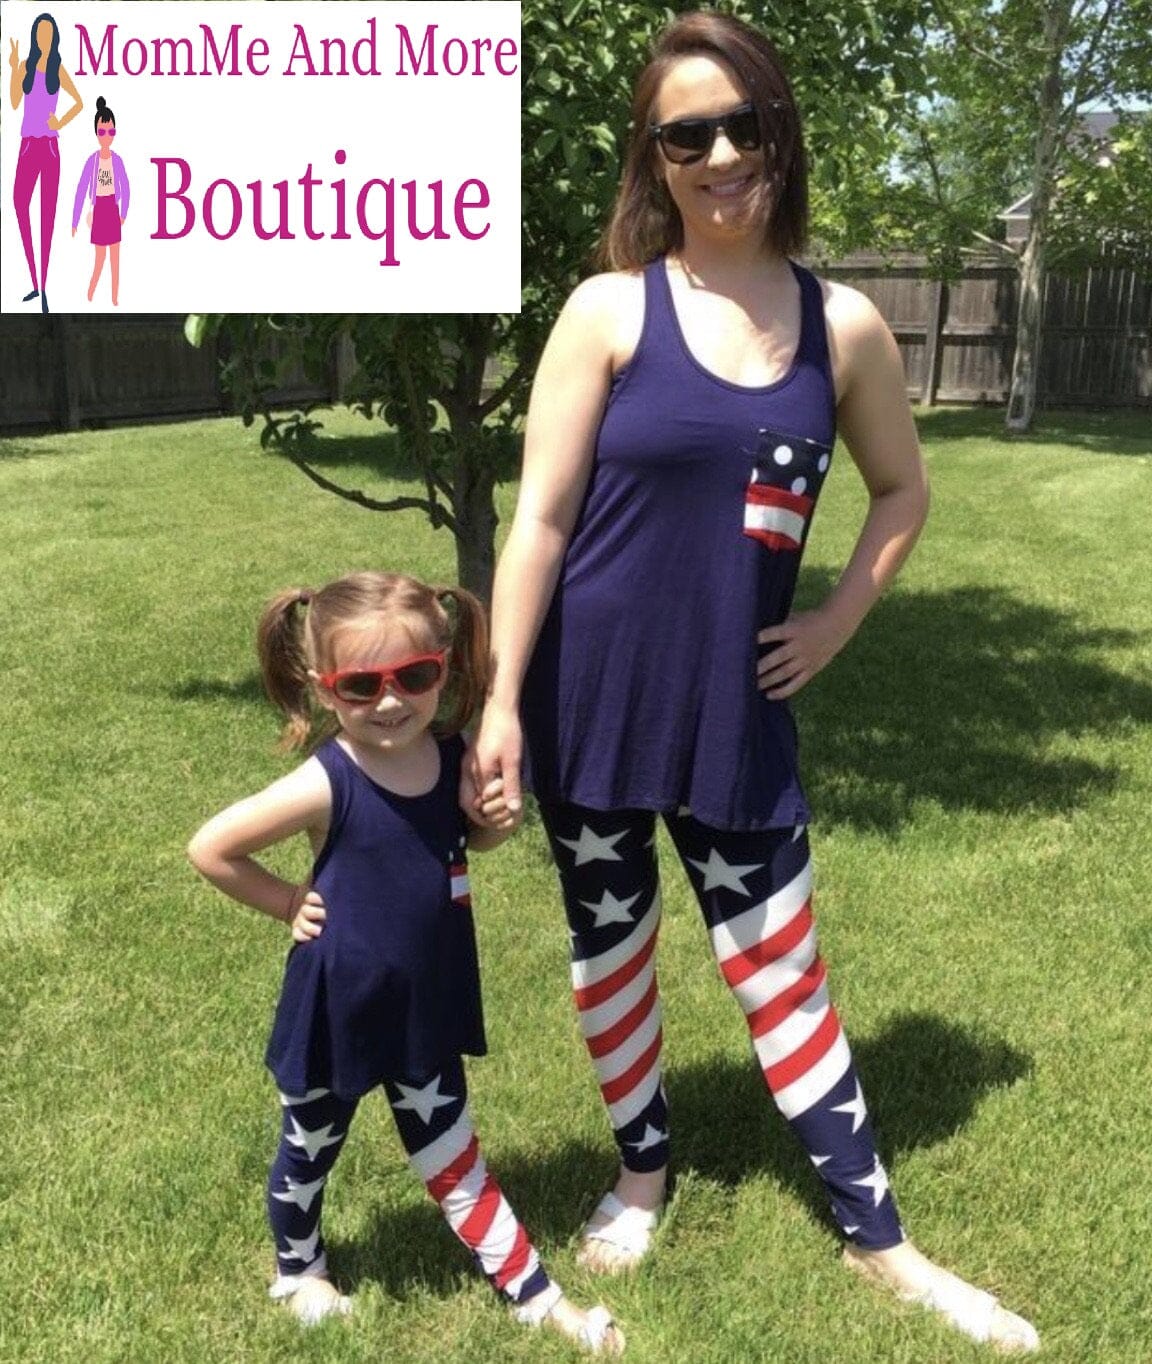 4th of July Leggings | Fourth of July Leggings & Tights | Tipsy Elves